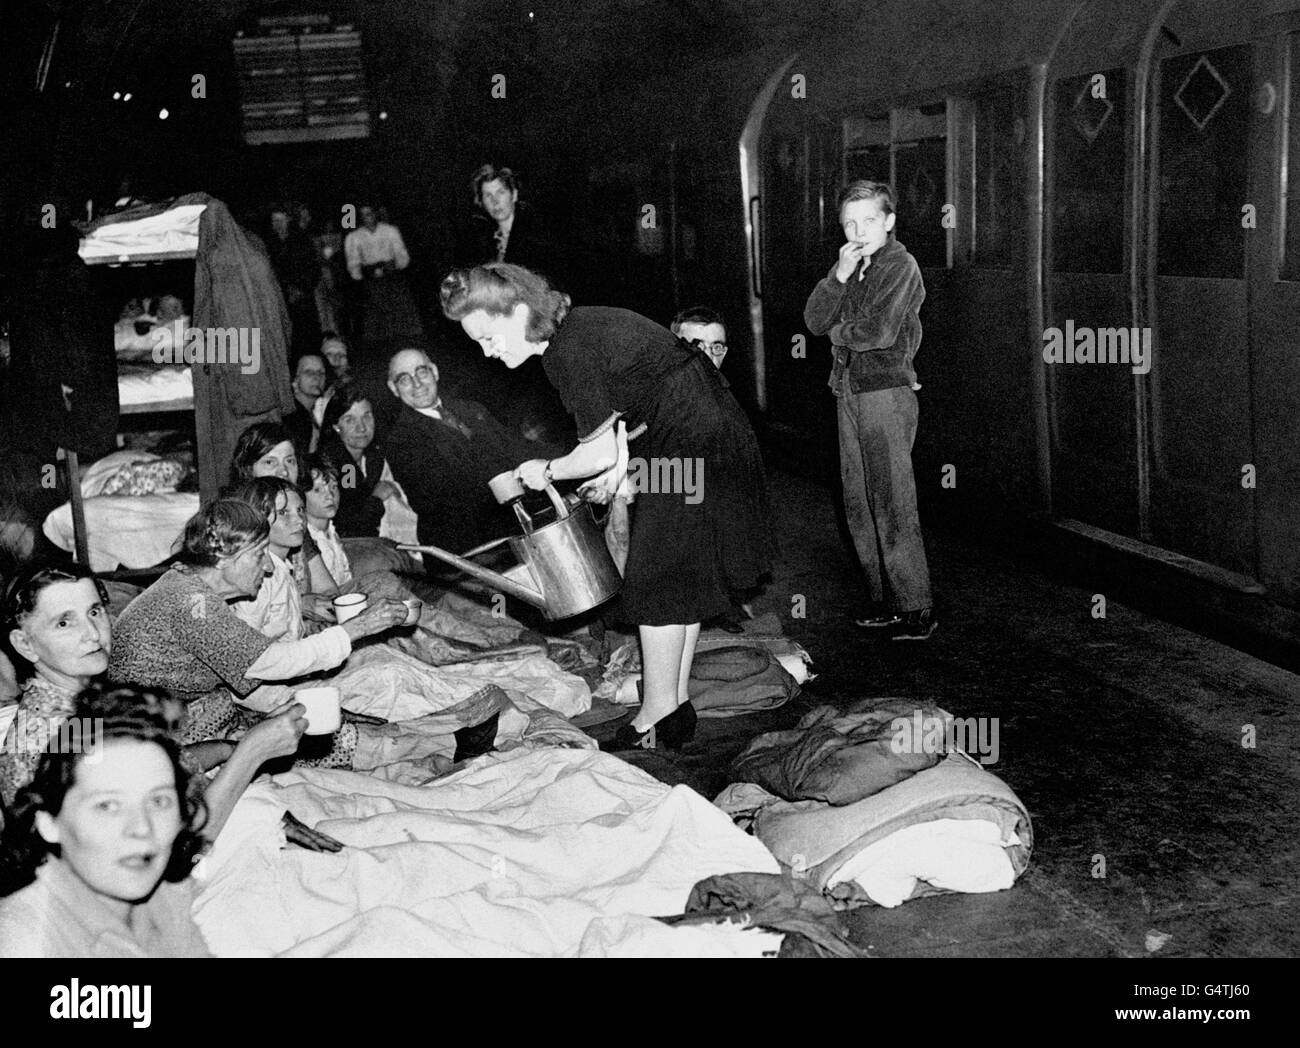 A woman dispenses water from a watering can as Londoners take shelter in the London Underground during the Blitz. Stock Photo